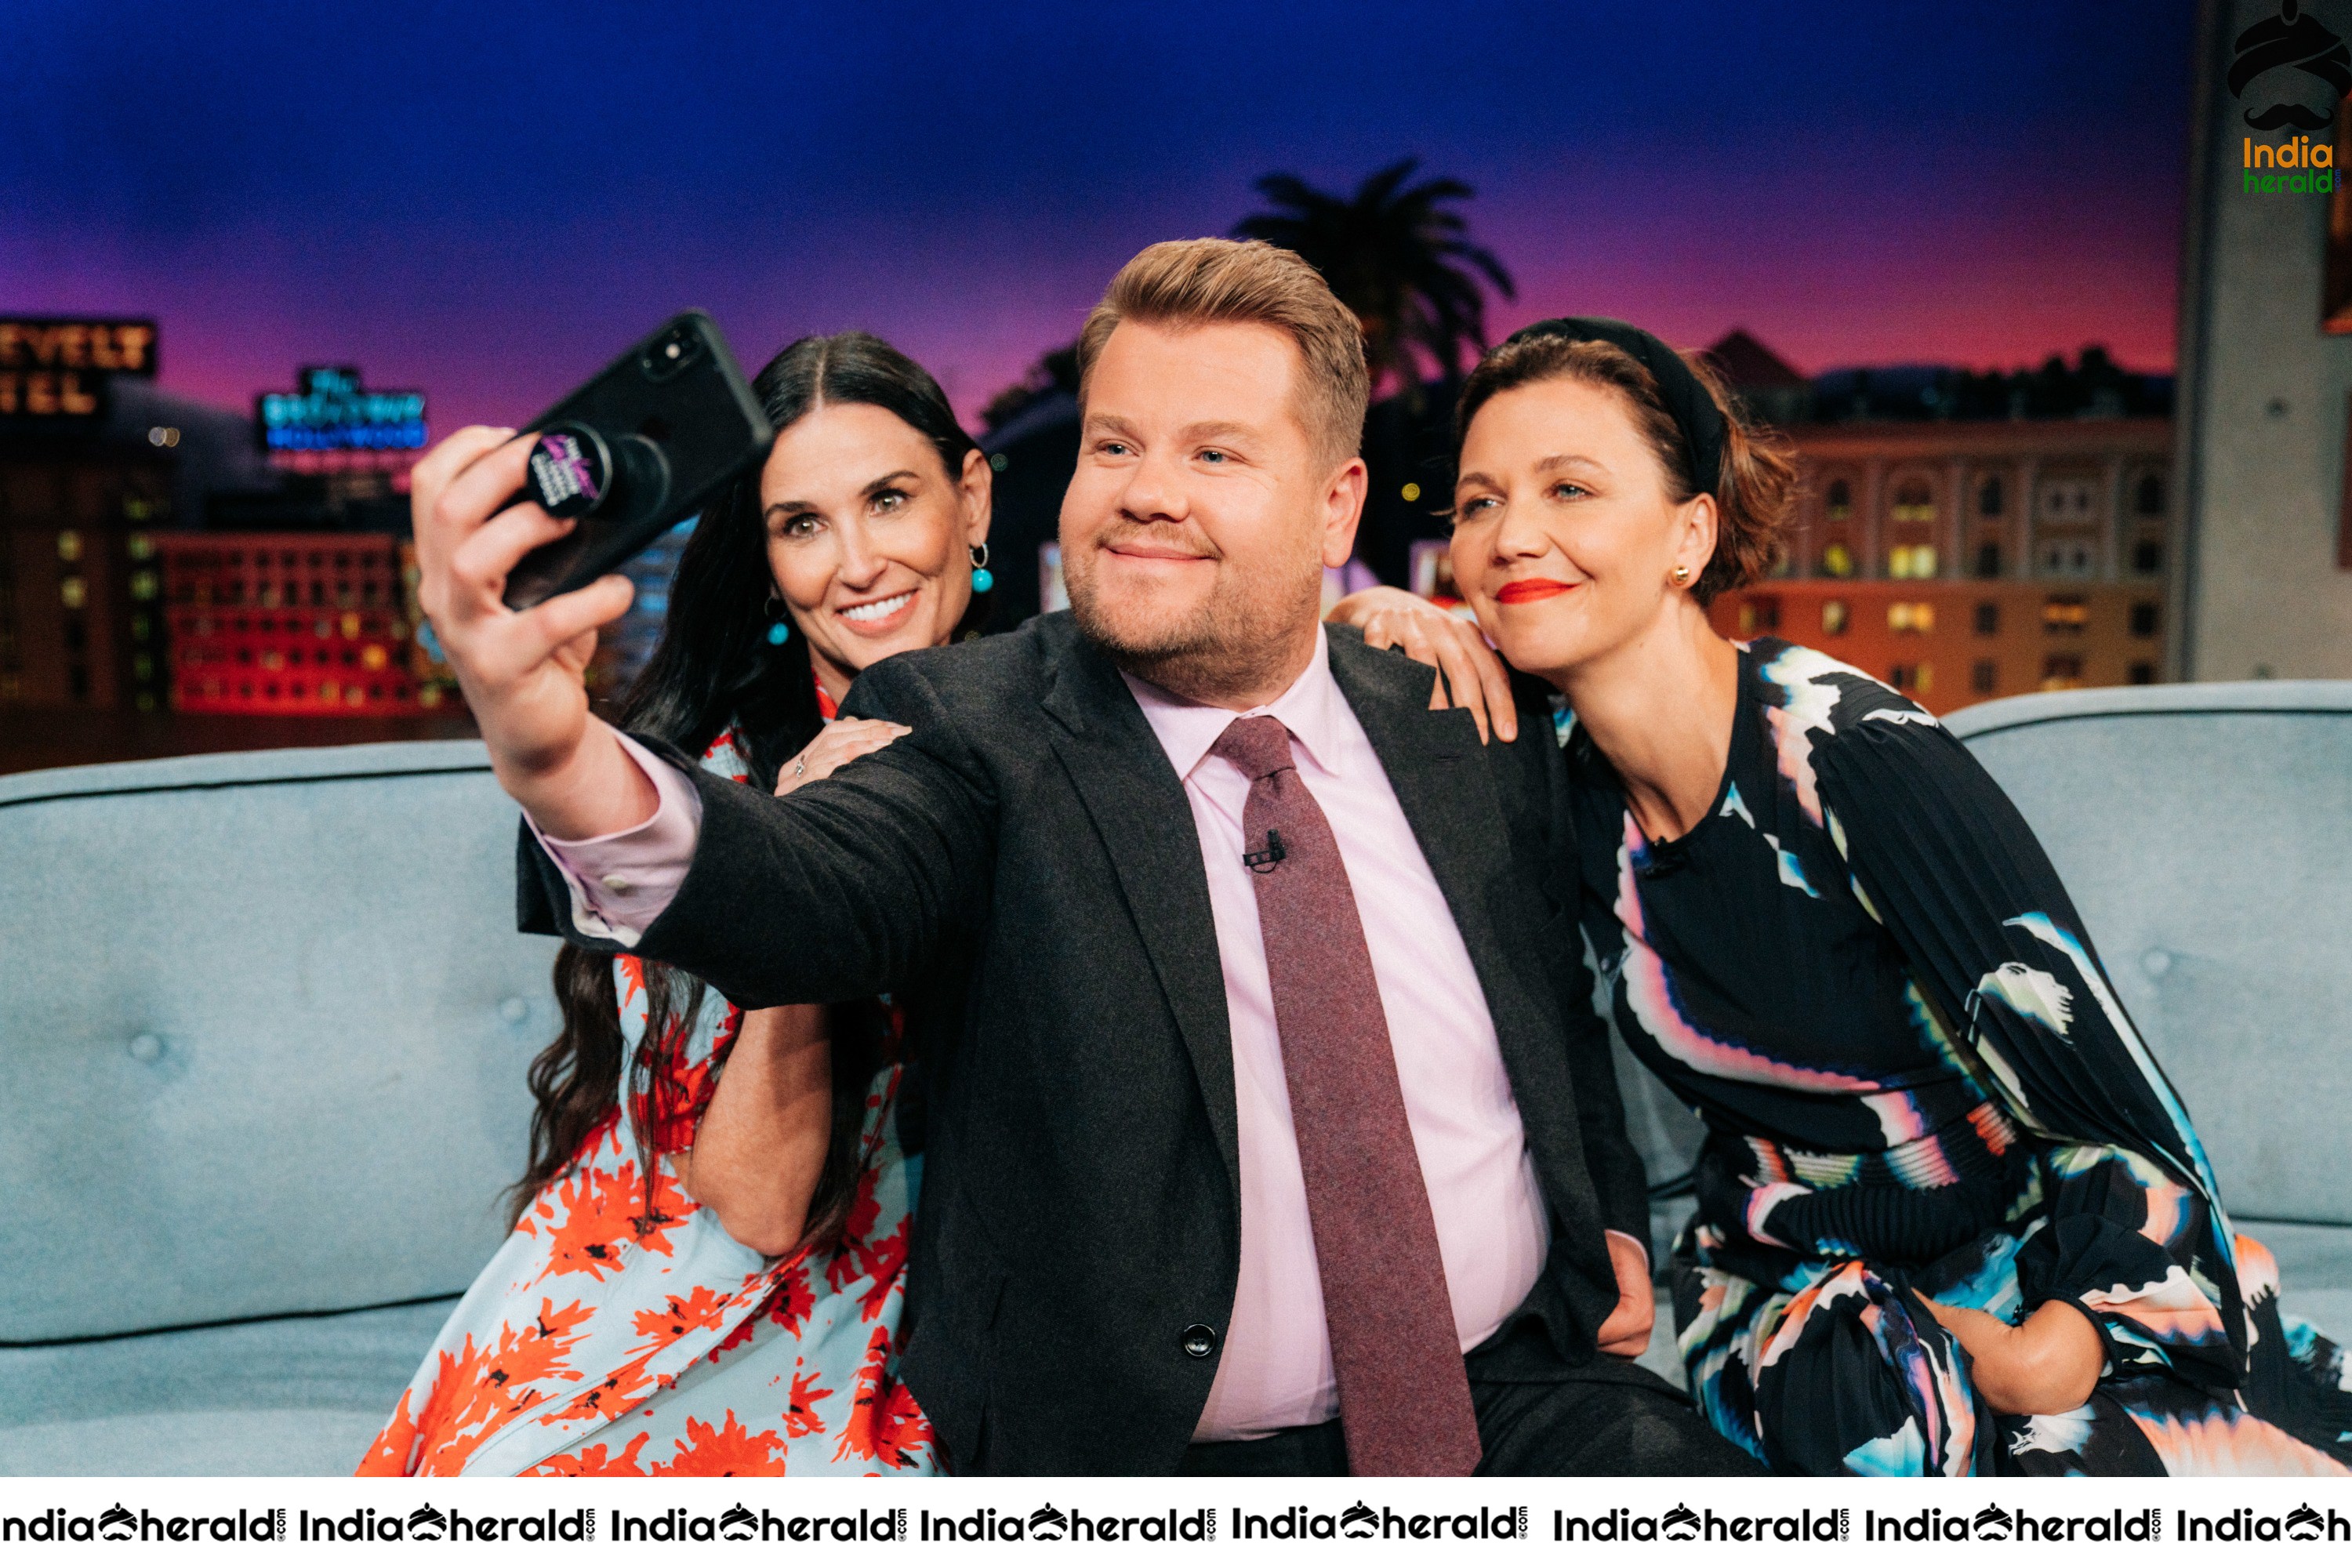 Demi Moore at The Late Late Show with James Corden